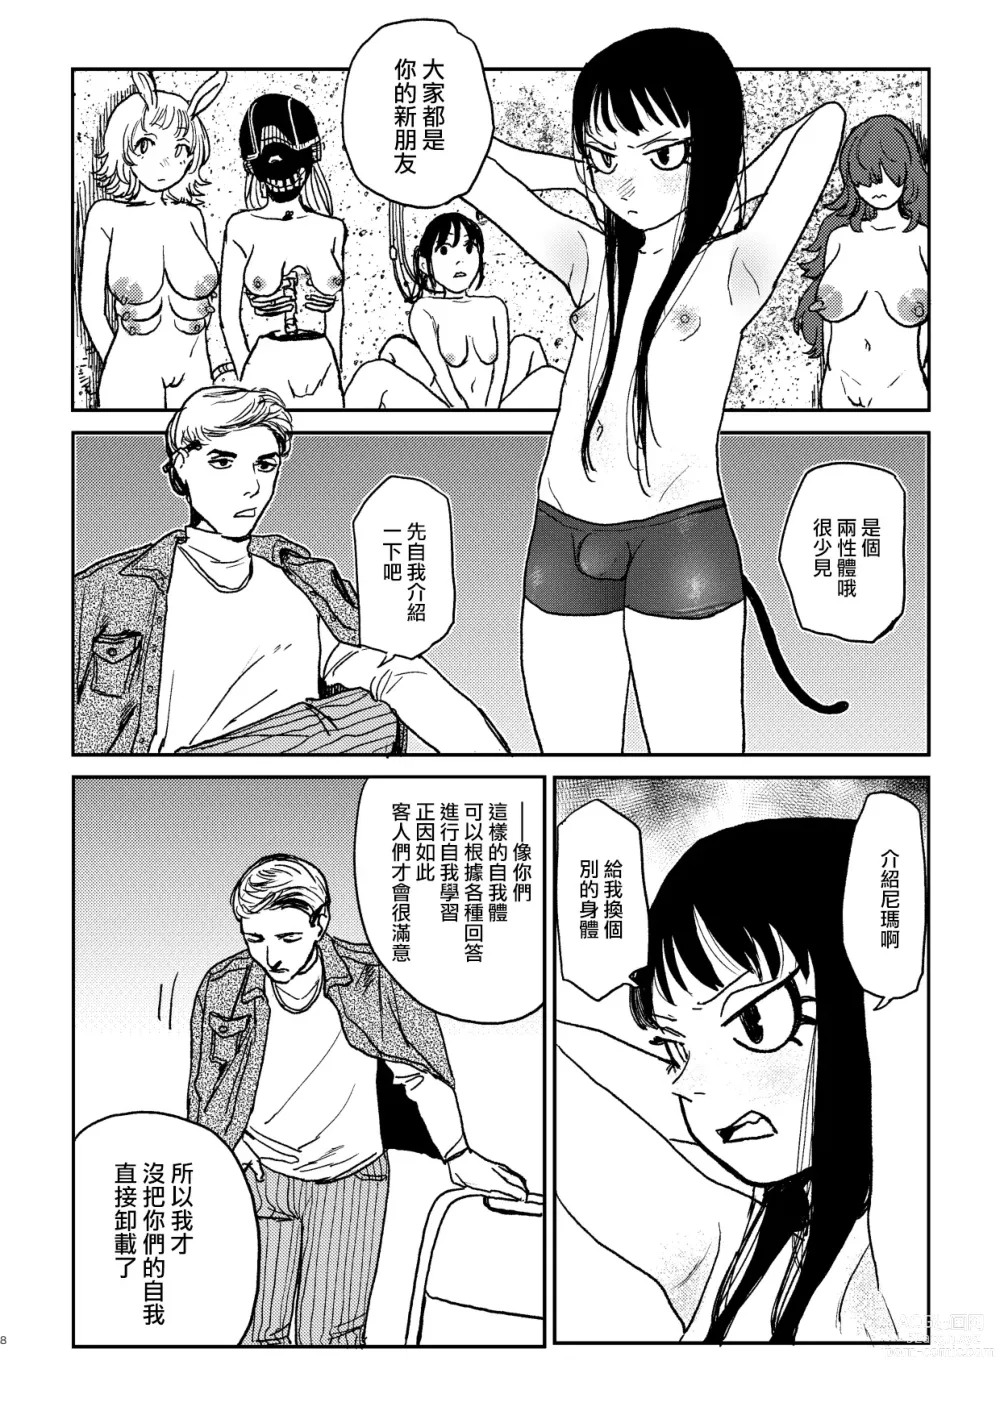 Page 7 of doujinshi better than SEX:A